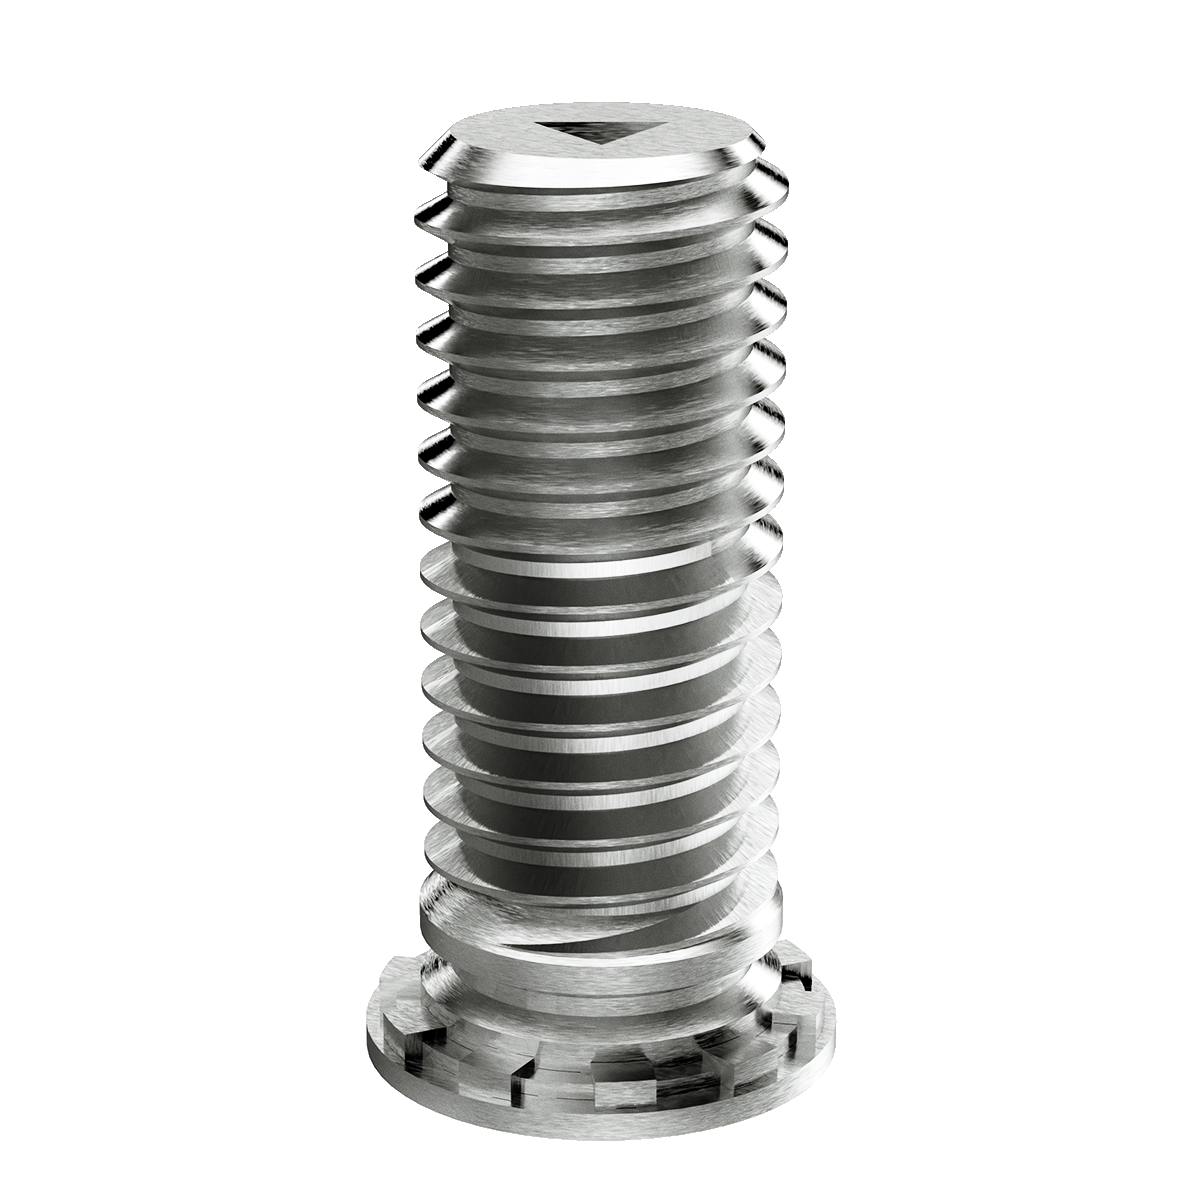 Self-Clinching Stud, For SS, A286 Stainless Steel, Passivated, 1/4-20 x 1.50, 100 Pack